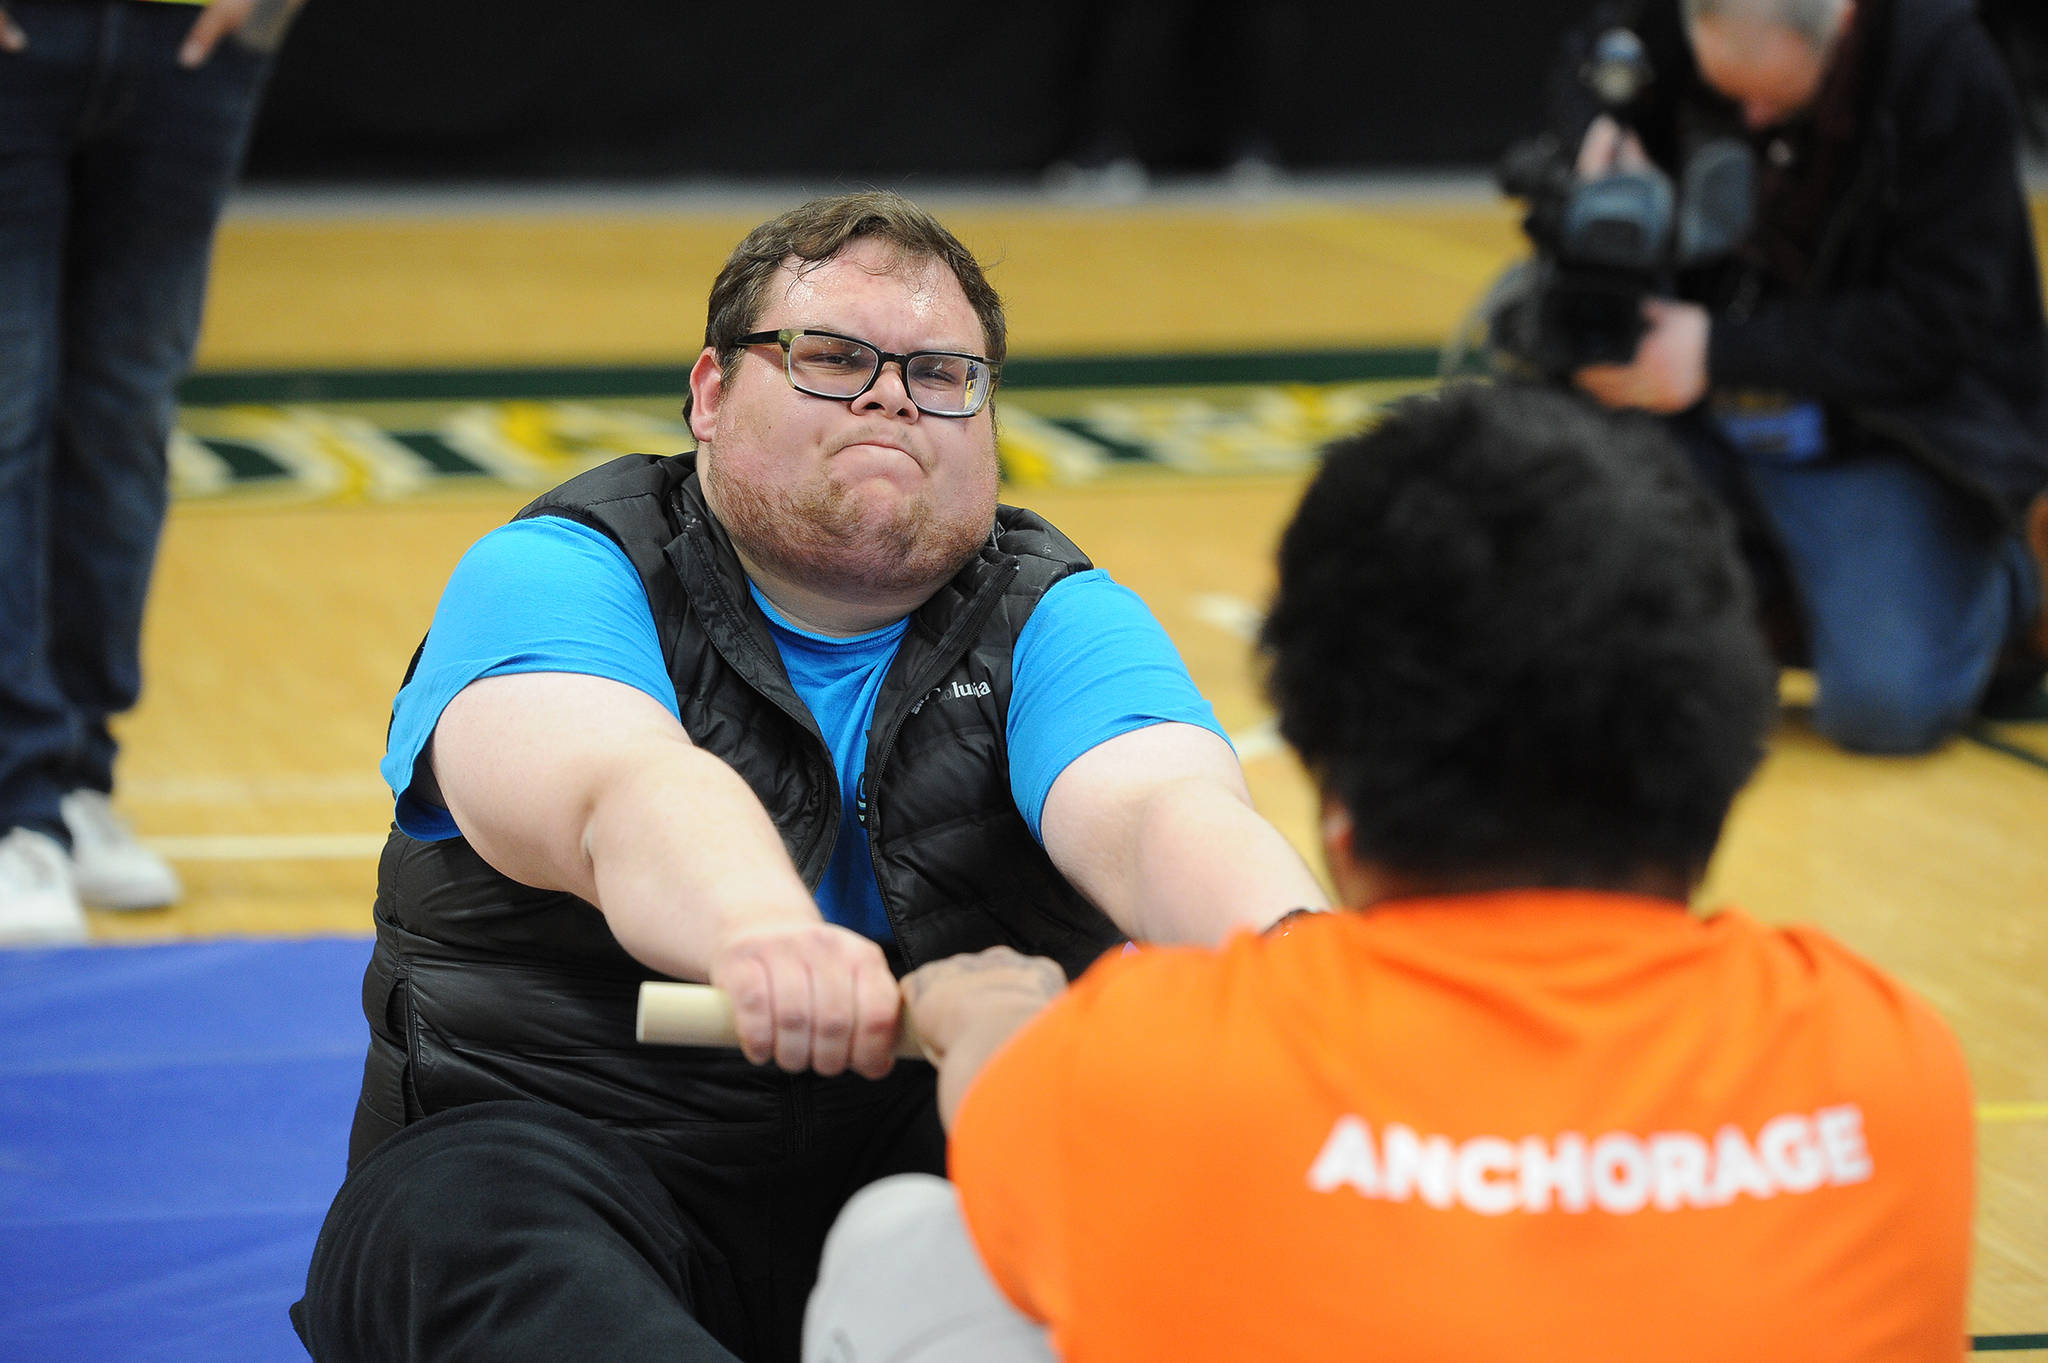 Thunder Mountain High School senior Sterling Zuboff competes in the Eskimo Stick Pull at the 2019 NYO Games at the Alaska Airlines Center in Anchorage on Friday, April 26, 2019. (Michael Dinneen | For the Empire)